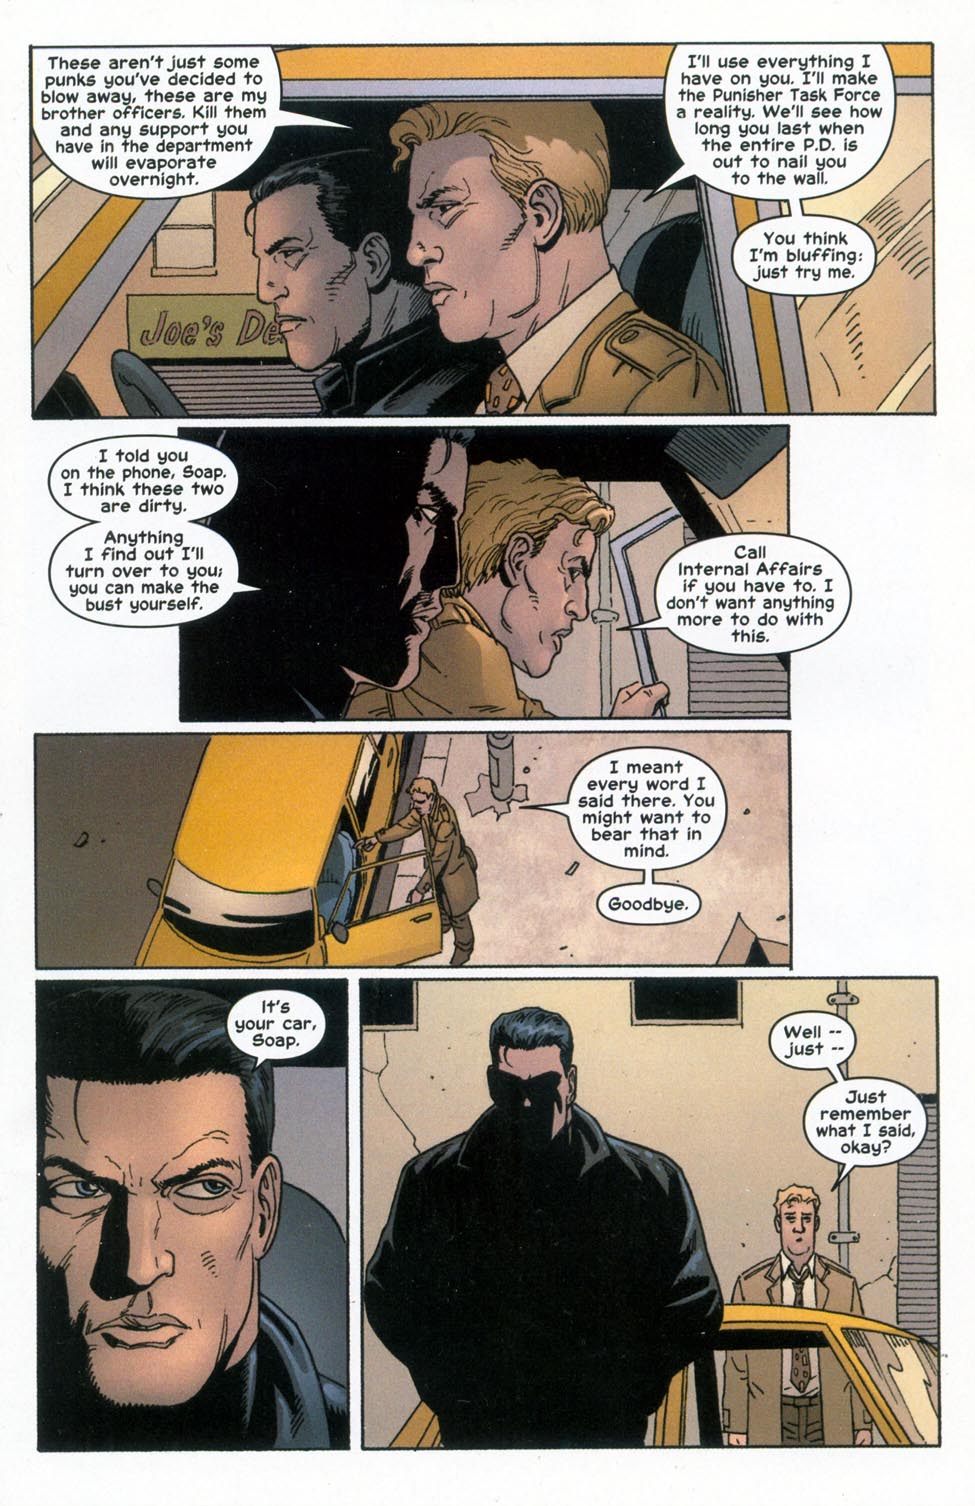 The Punisher (2001) issue 20 - Brotherhood #01 - Page 9